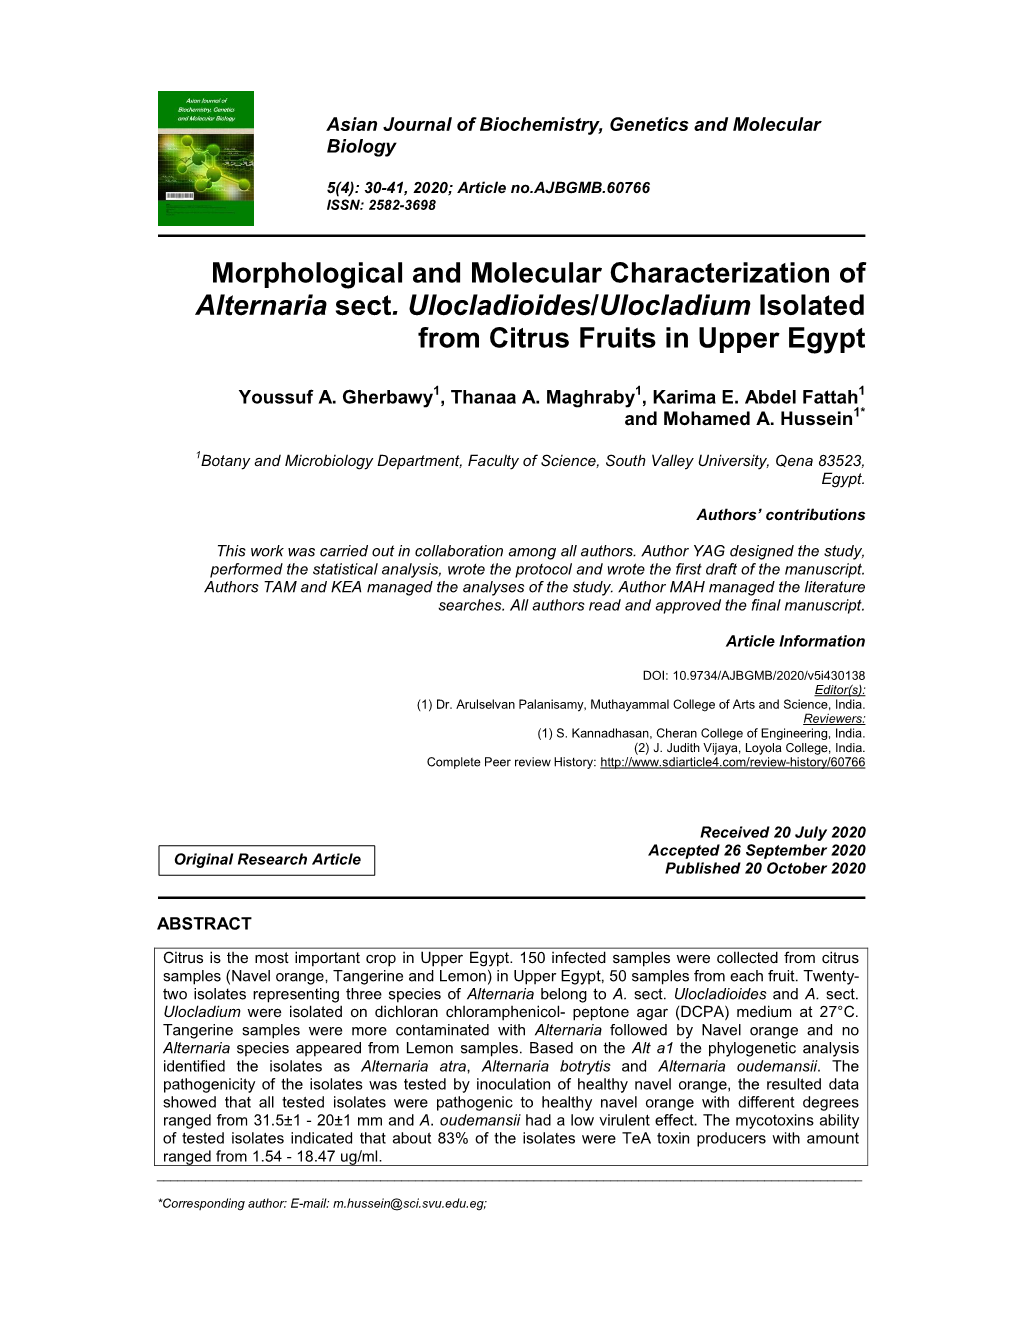 Morphological and Molecular Characterization of Alternaria Sect